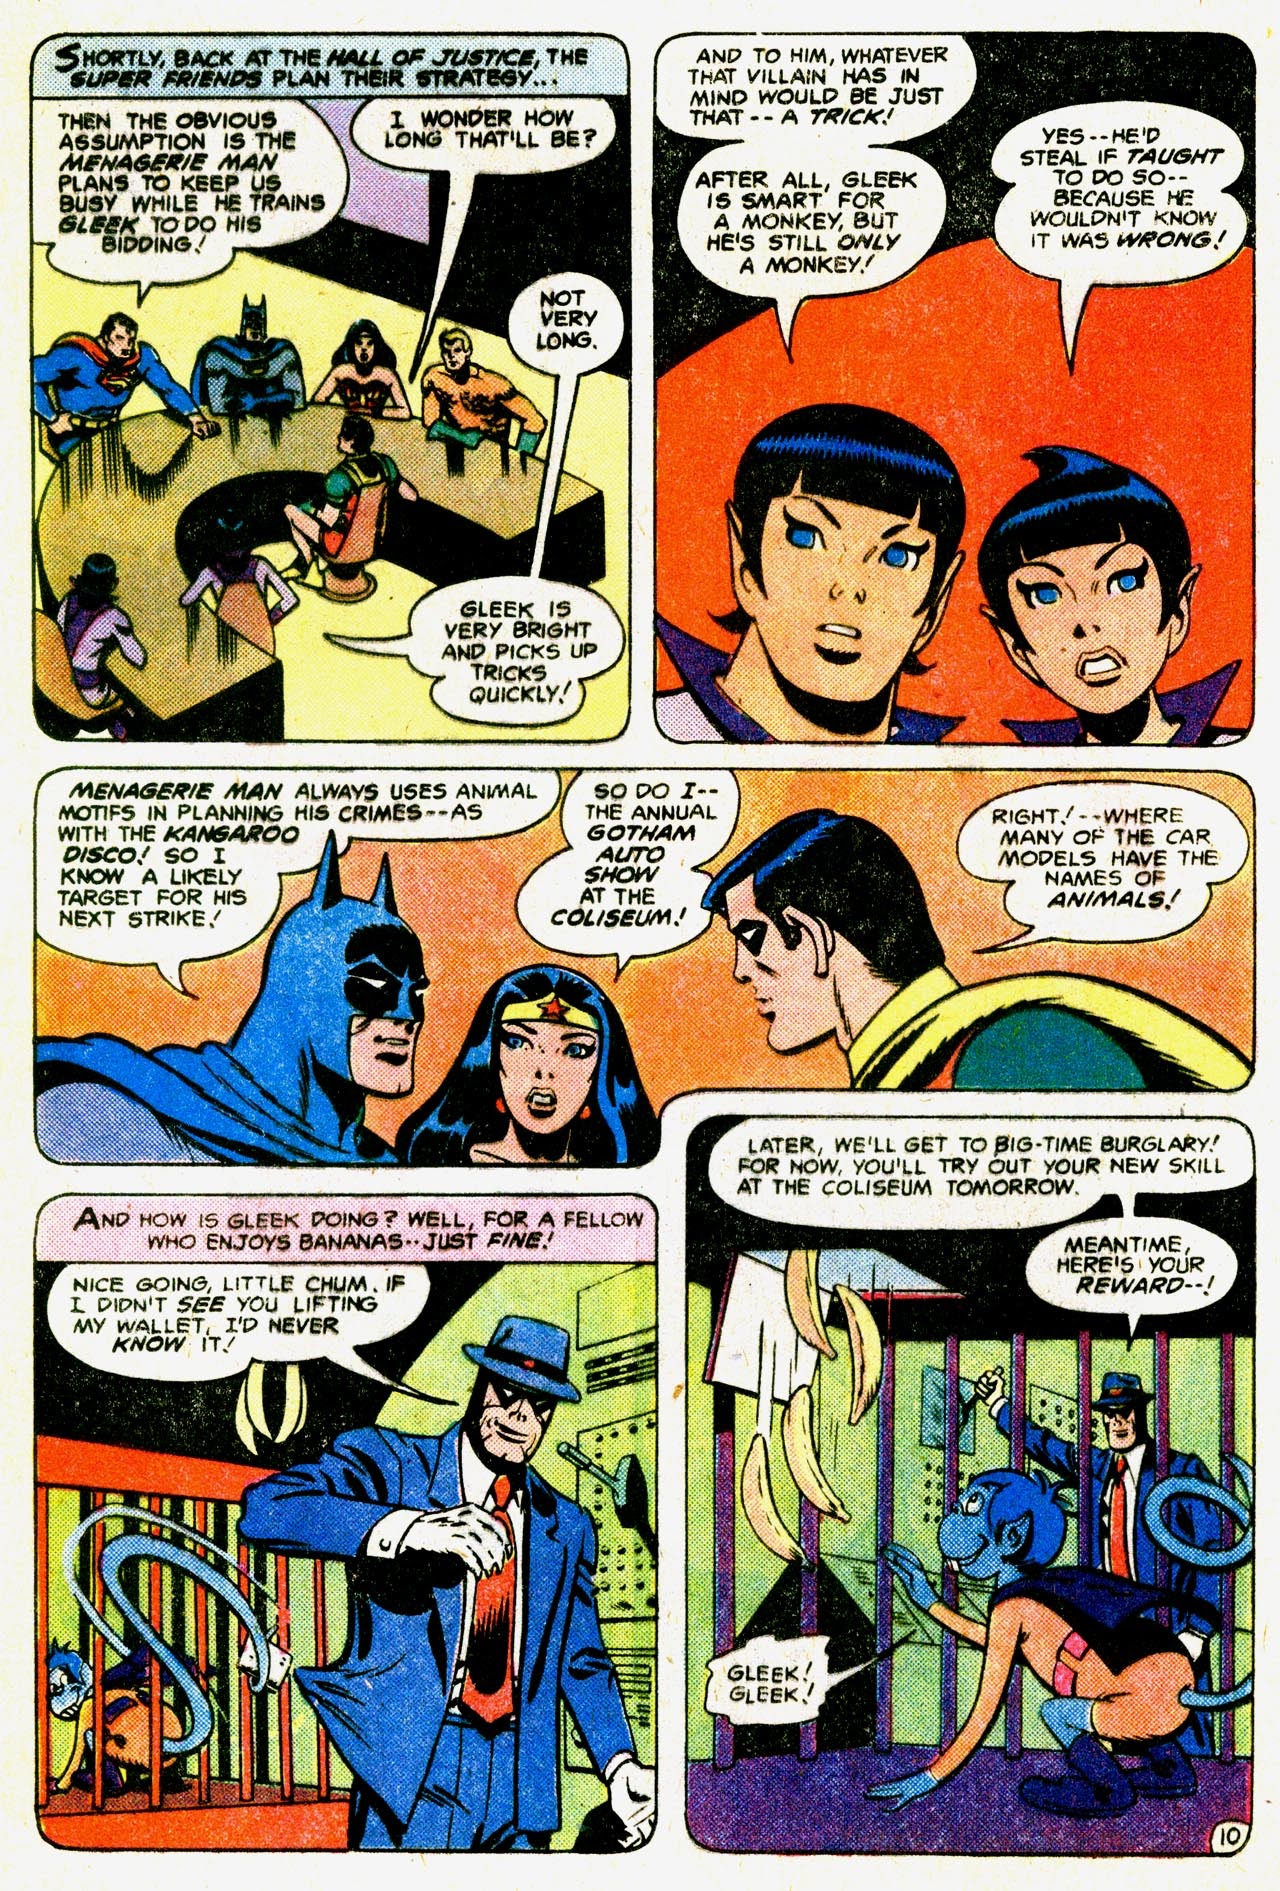 Read online Super Friends Special comic -  Issue # Full - 12